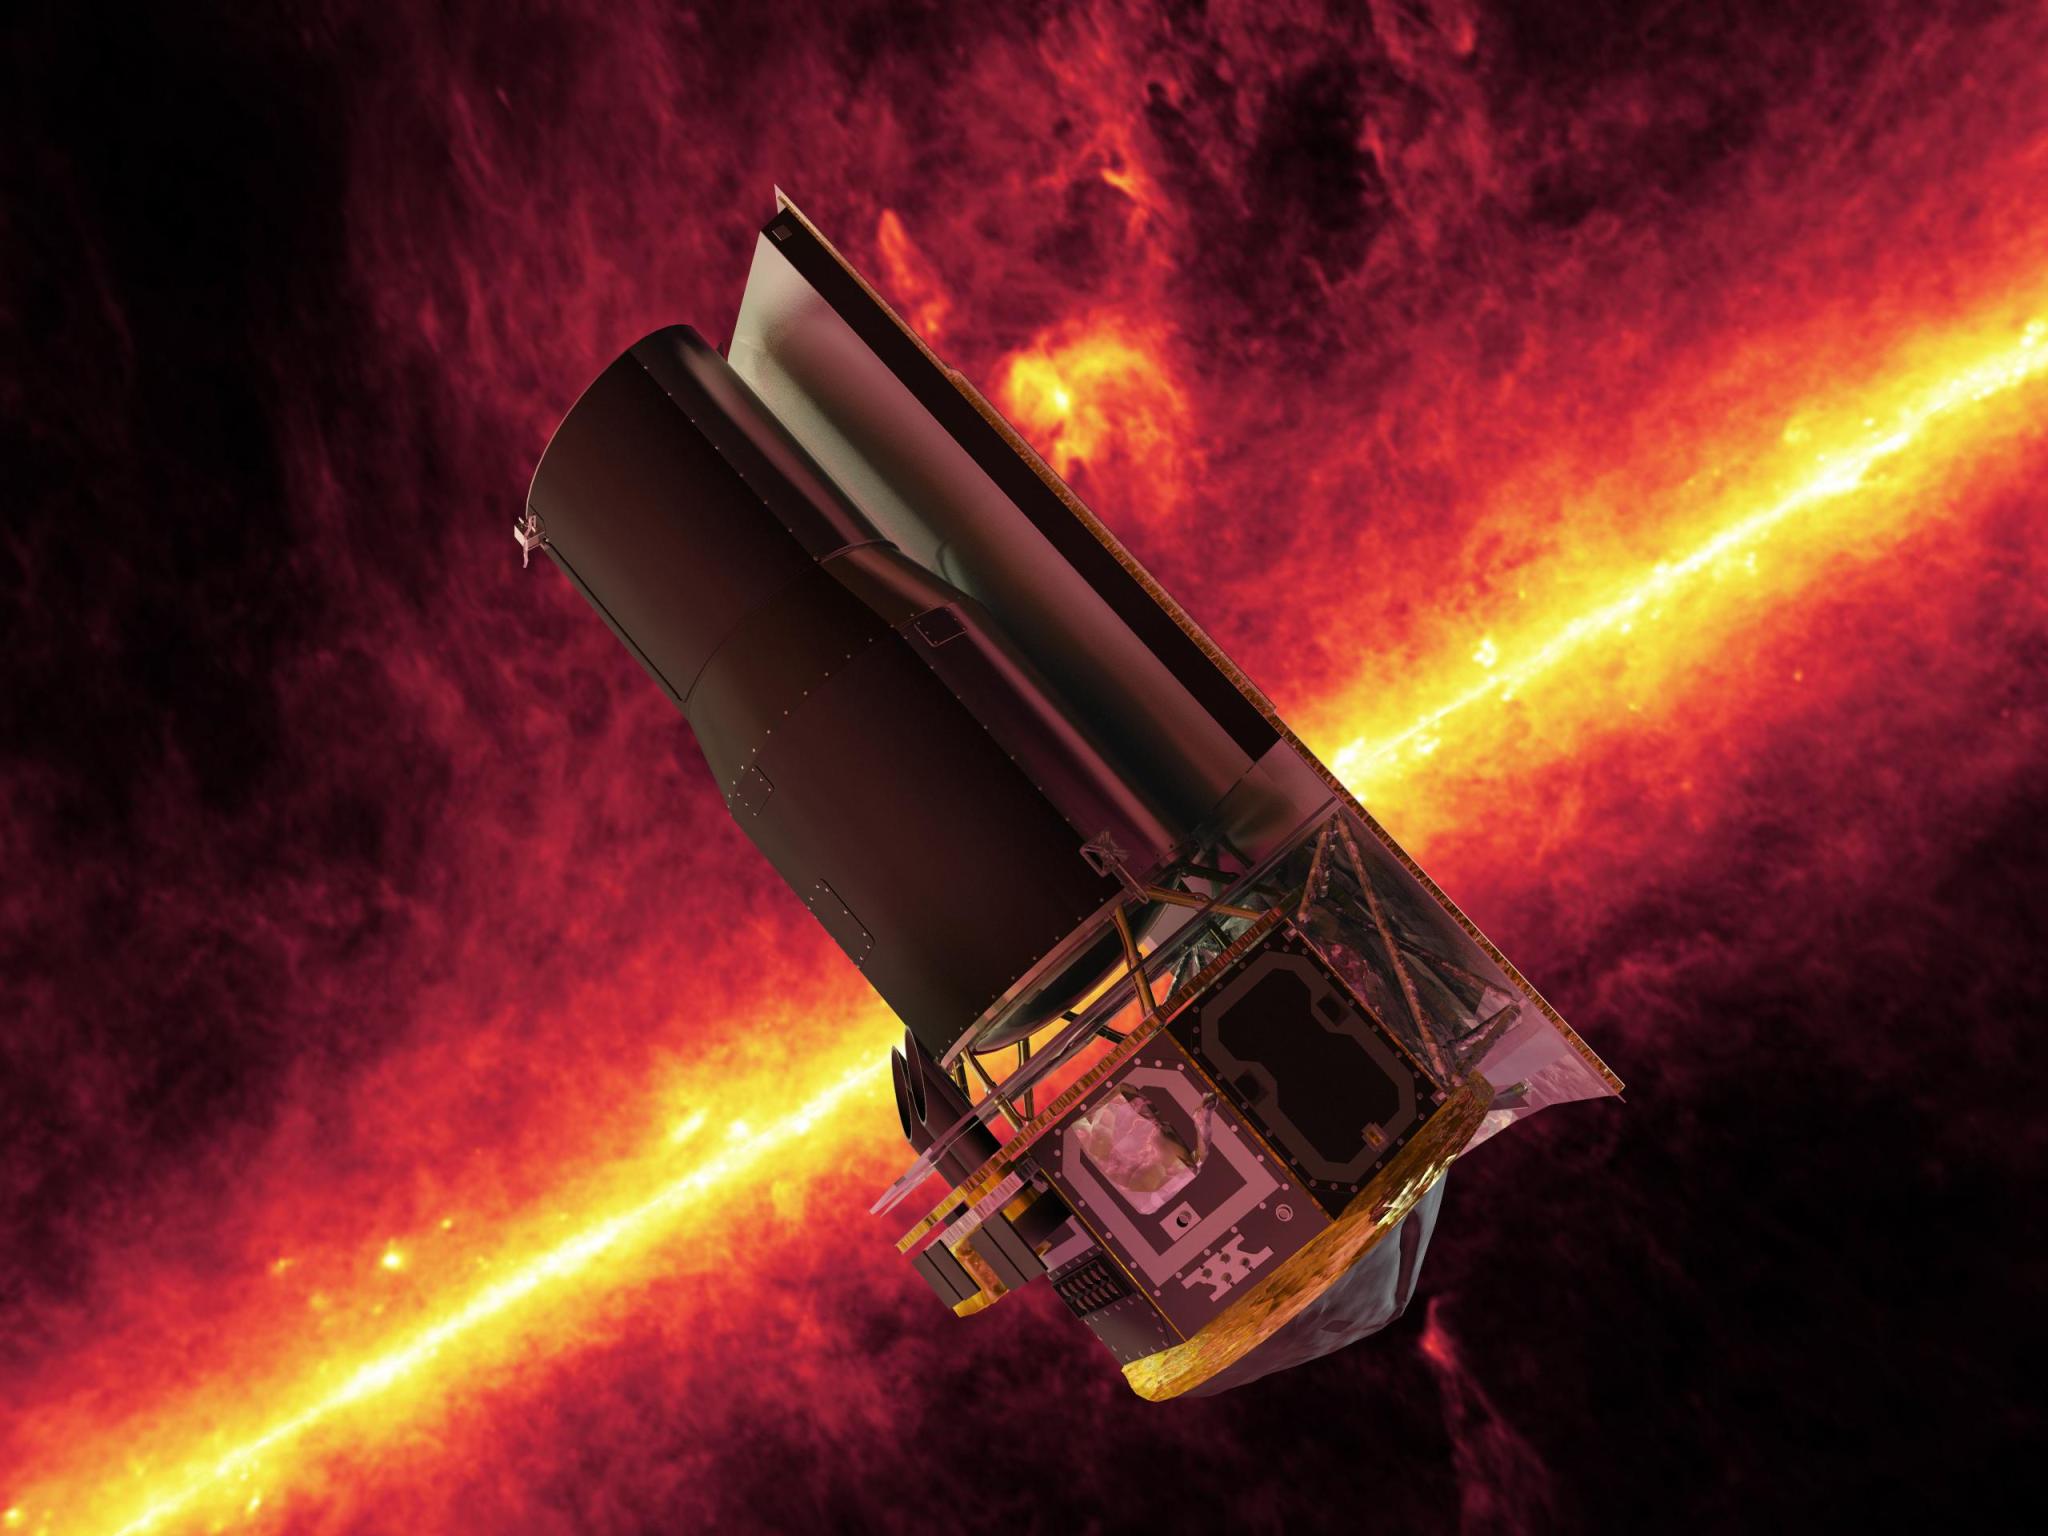 Illustration of Spitzer Space Telescope in front of infrared image